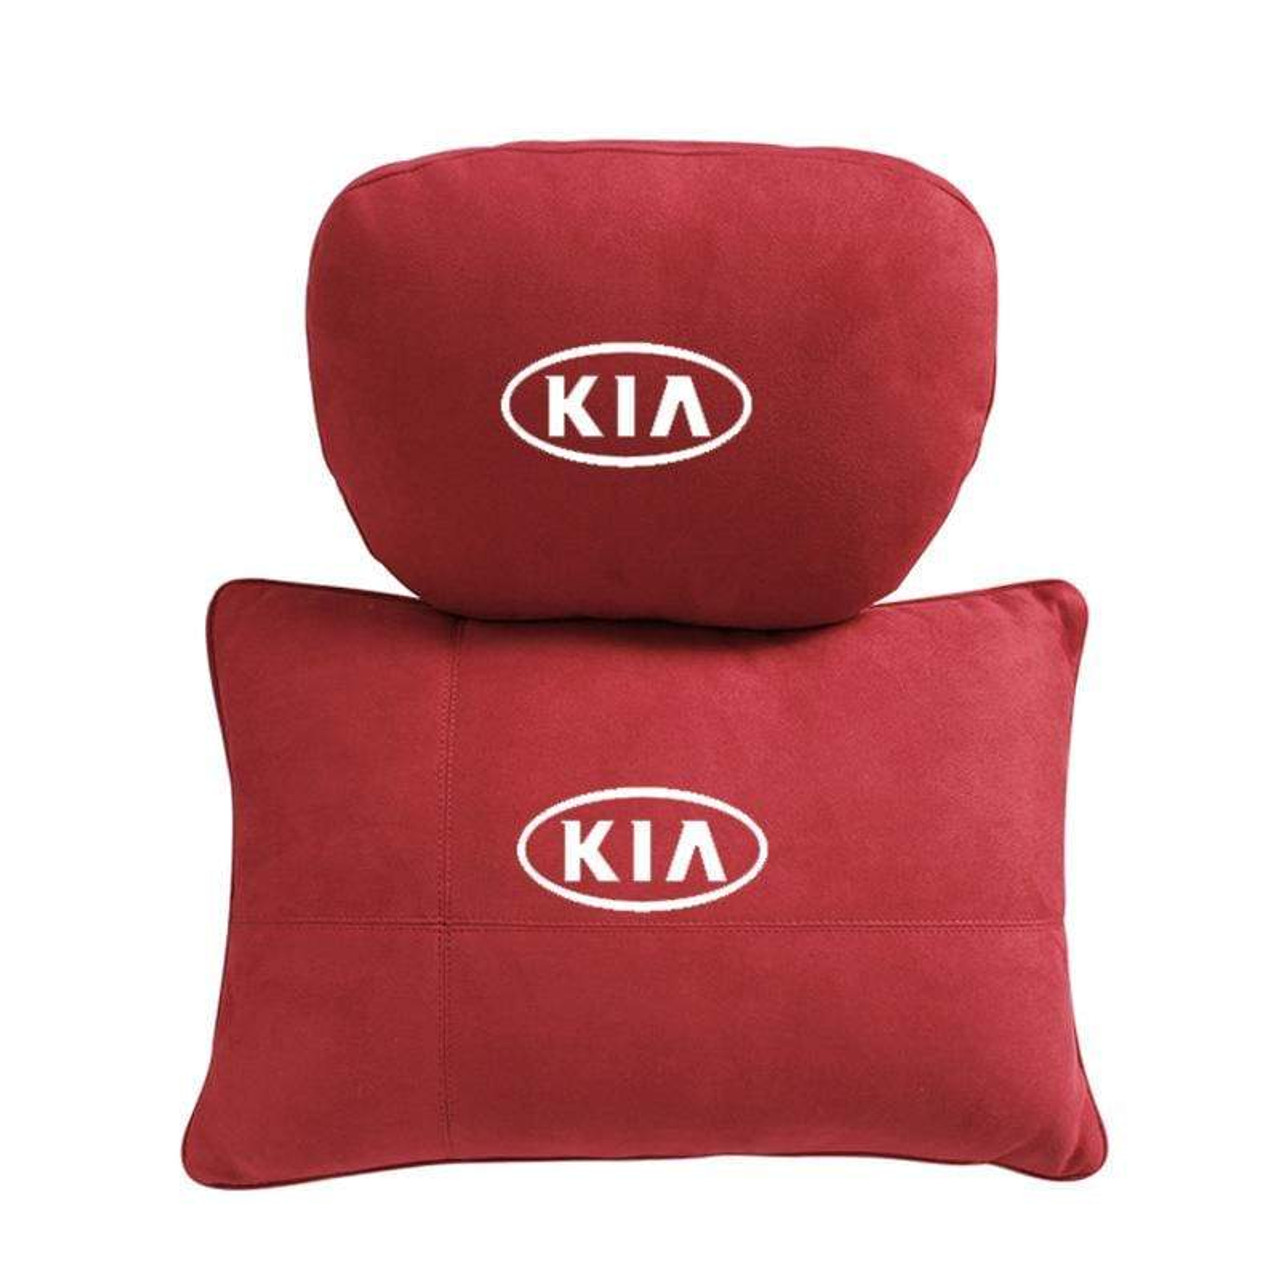 New Car Seat Headrest Neck Cushion Pillows For KIA Logo Red Real Leather  2PCS